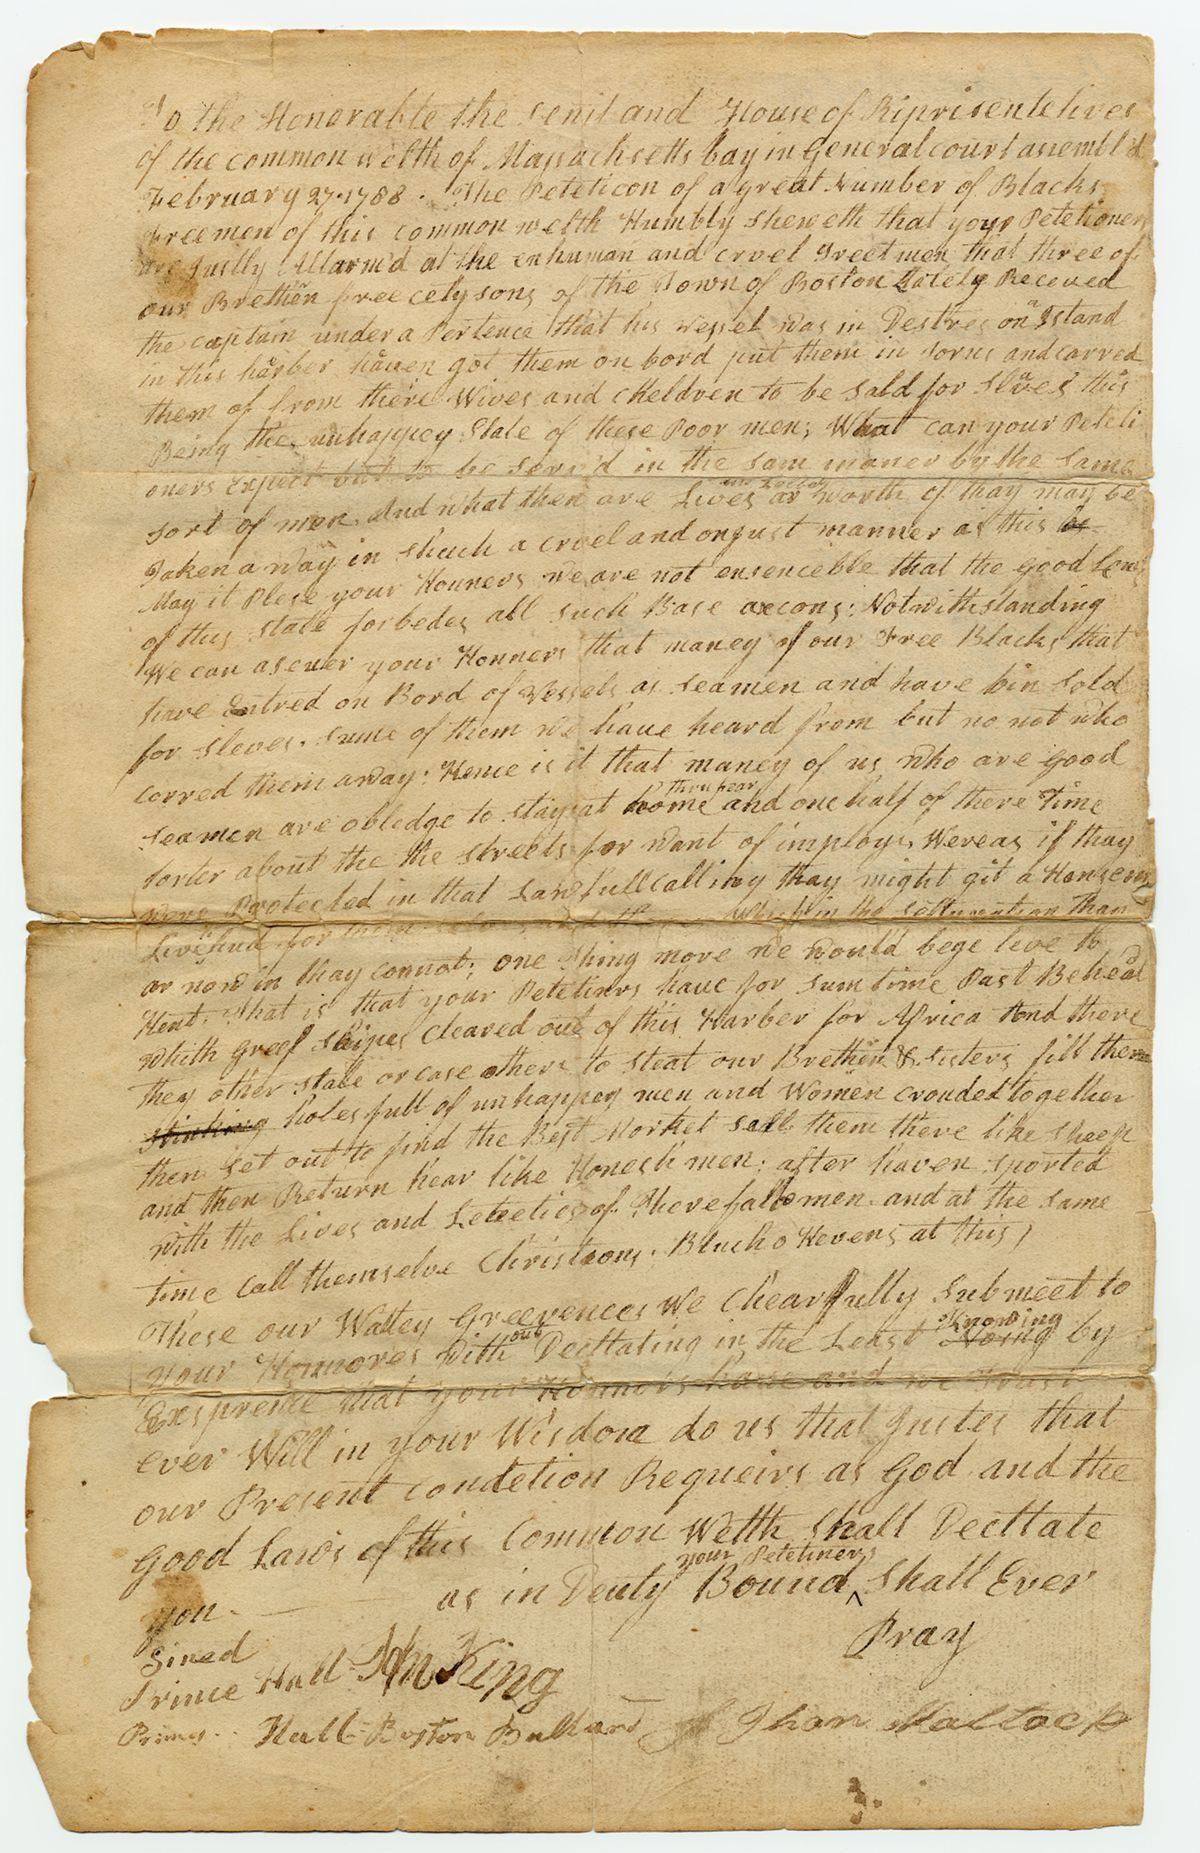 Prince Hall's 1788 petition to end the slave trade